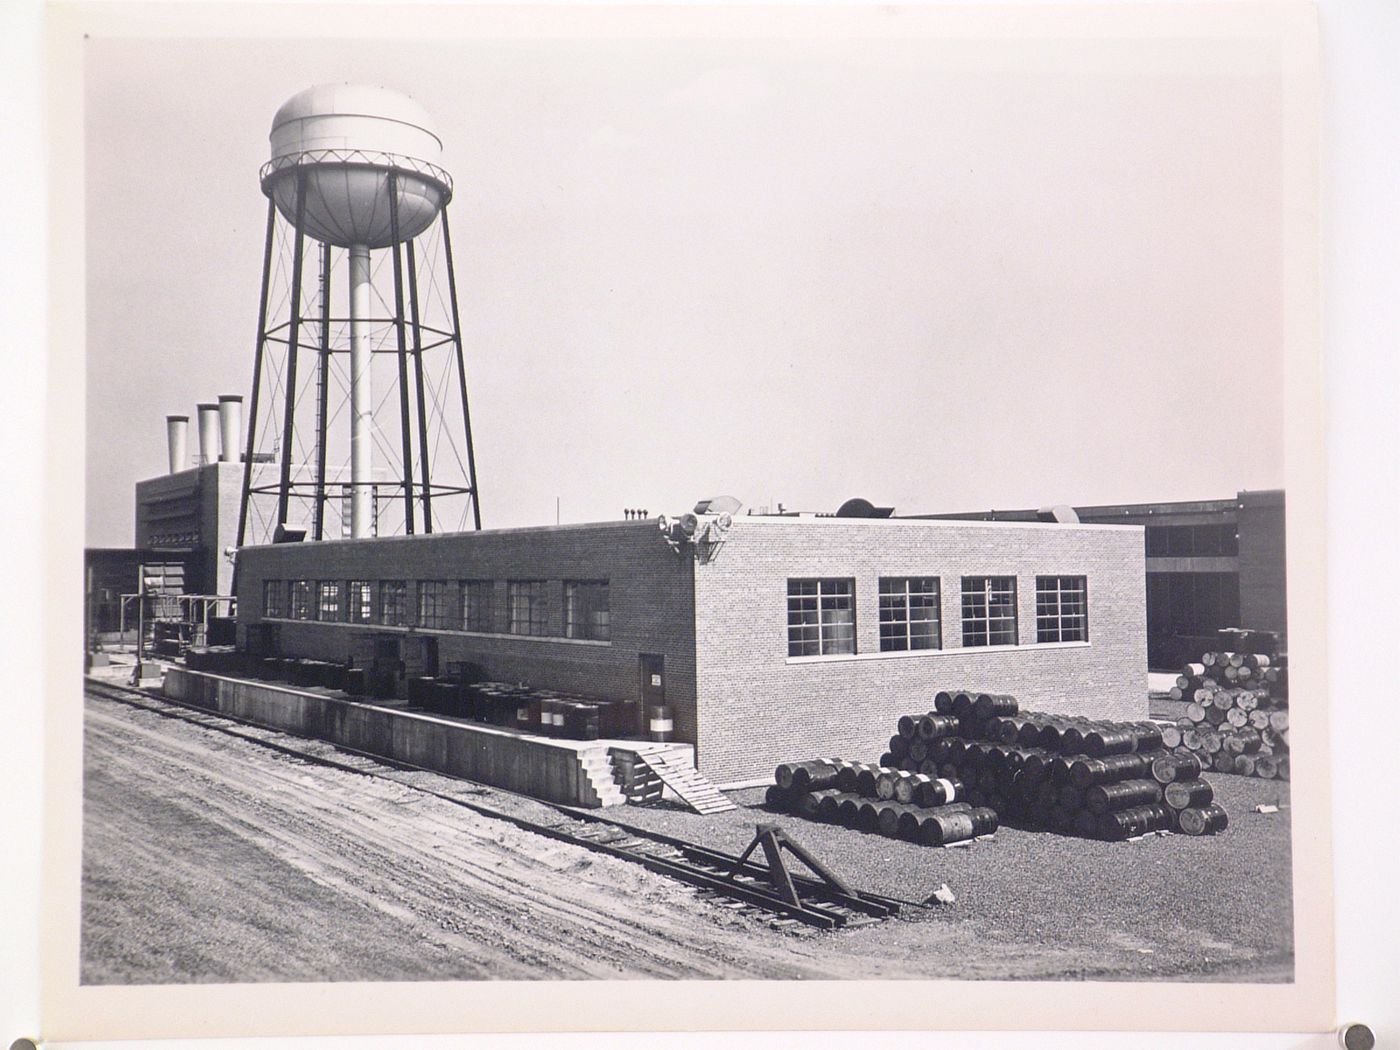 View of the Oil House in the foreground and the water tower and Boiler House in the background, Ford Motor Company Lincoln-Mercury division Automobile Assembly Plant, Metuchen, New Jersey